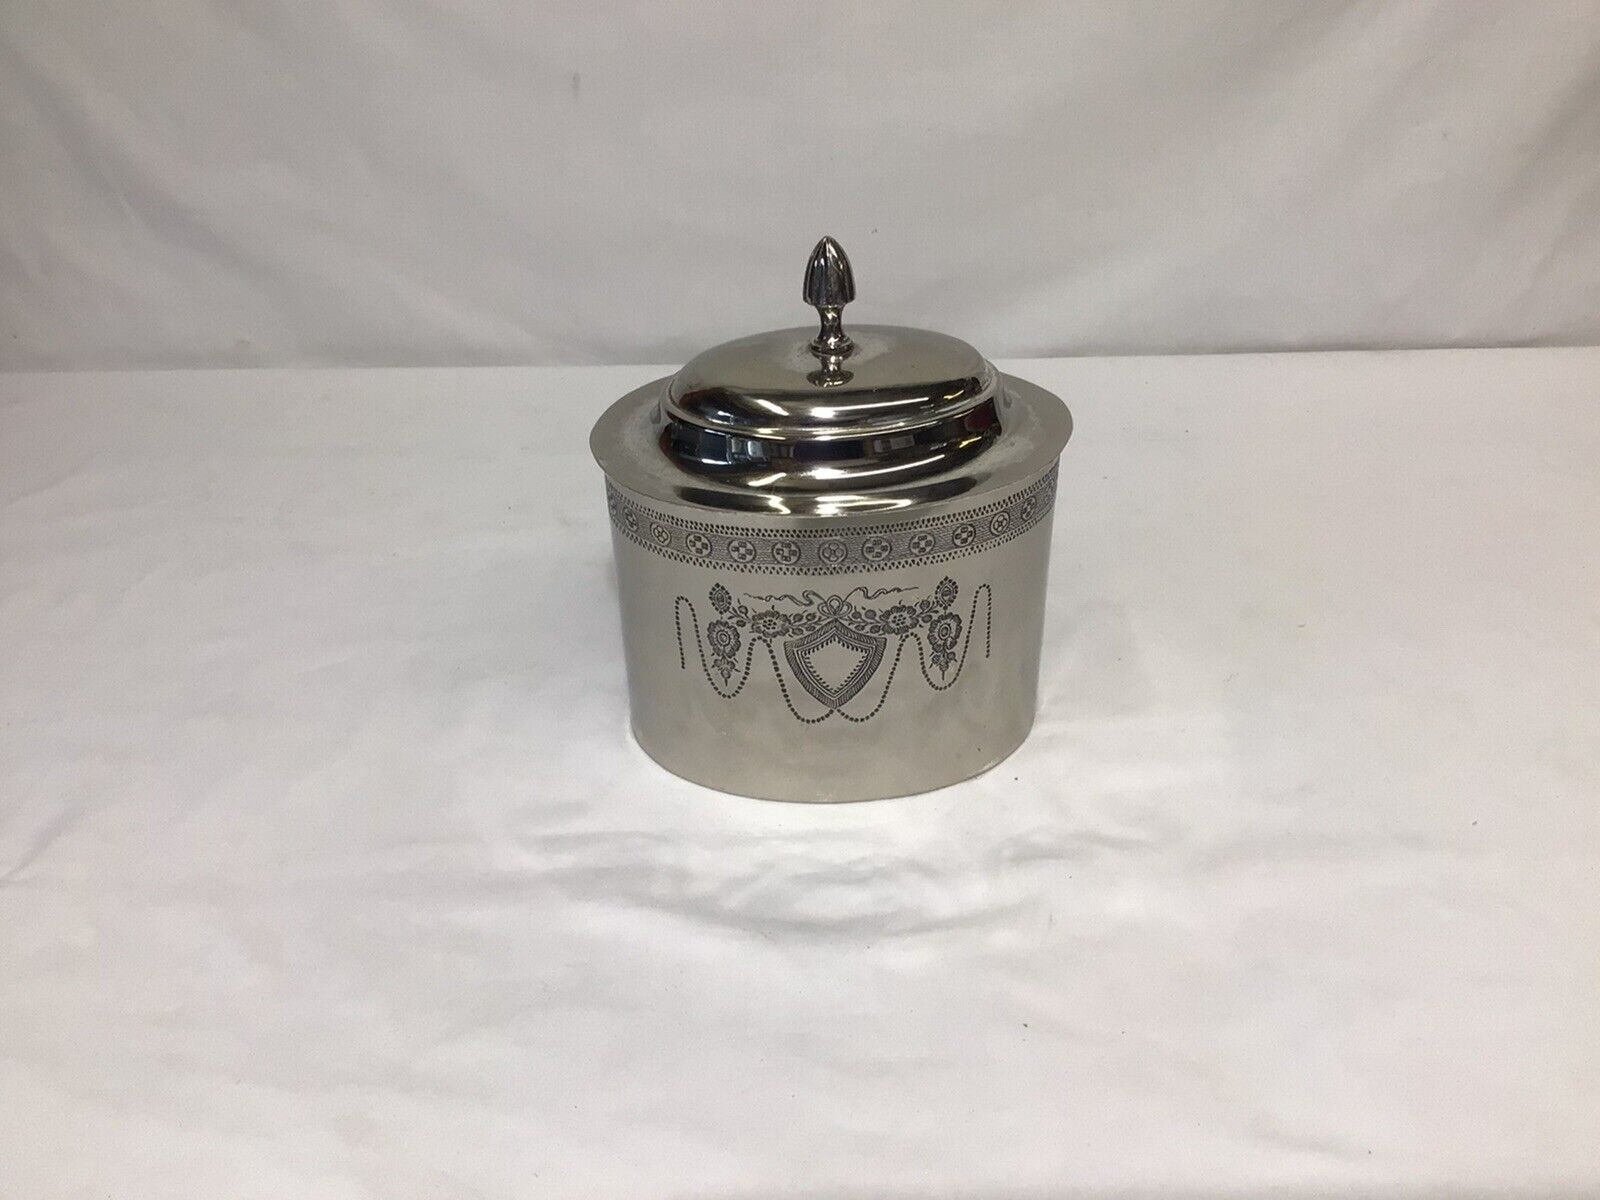 Antique Valuations: vintage silver plated tea caddy